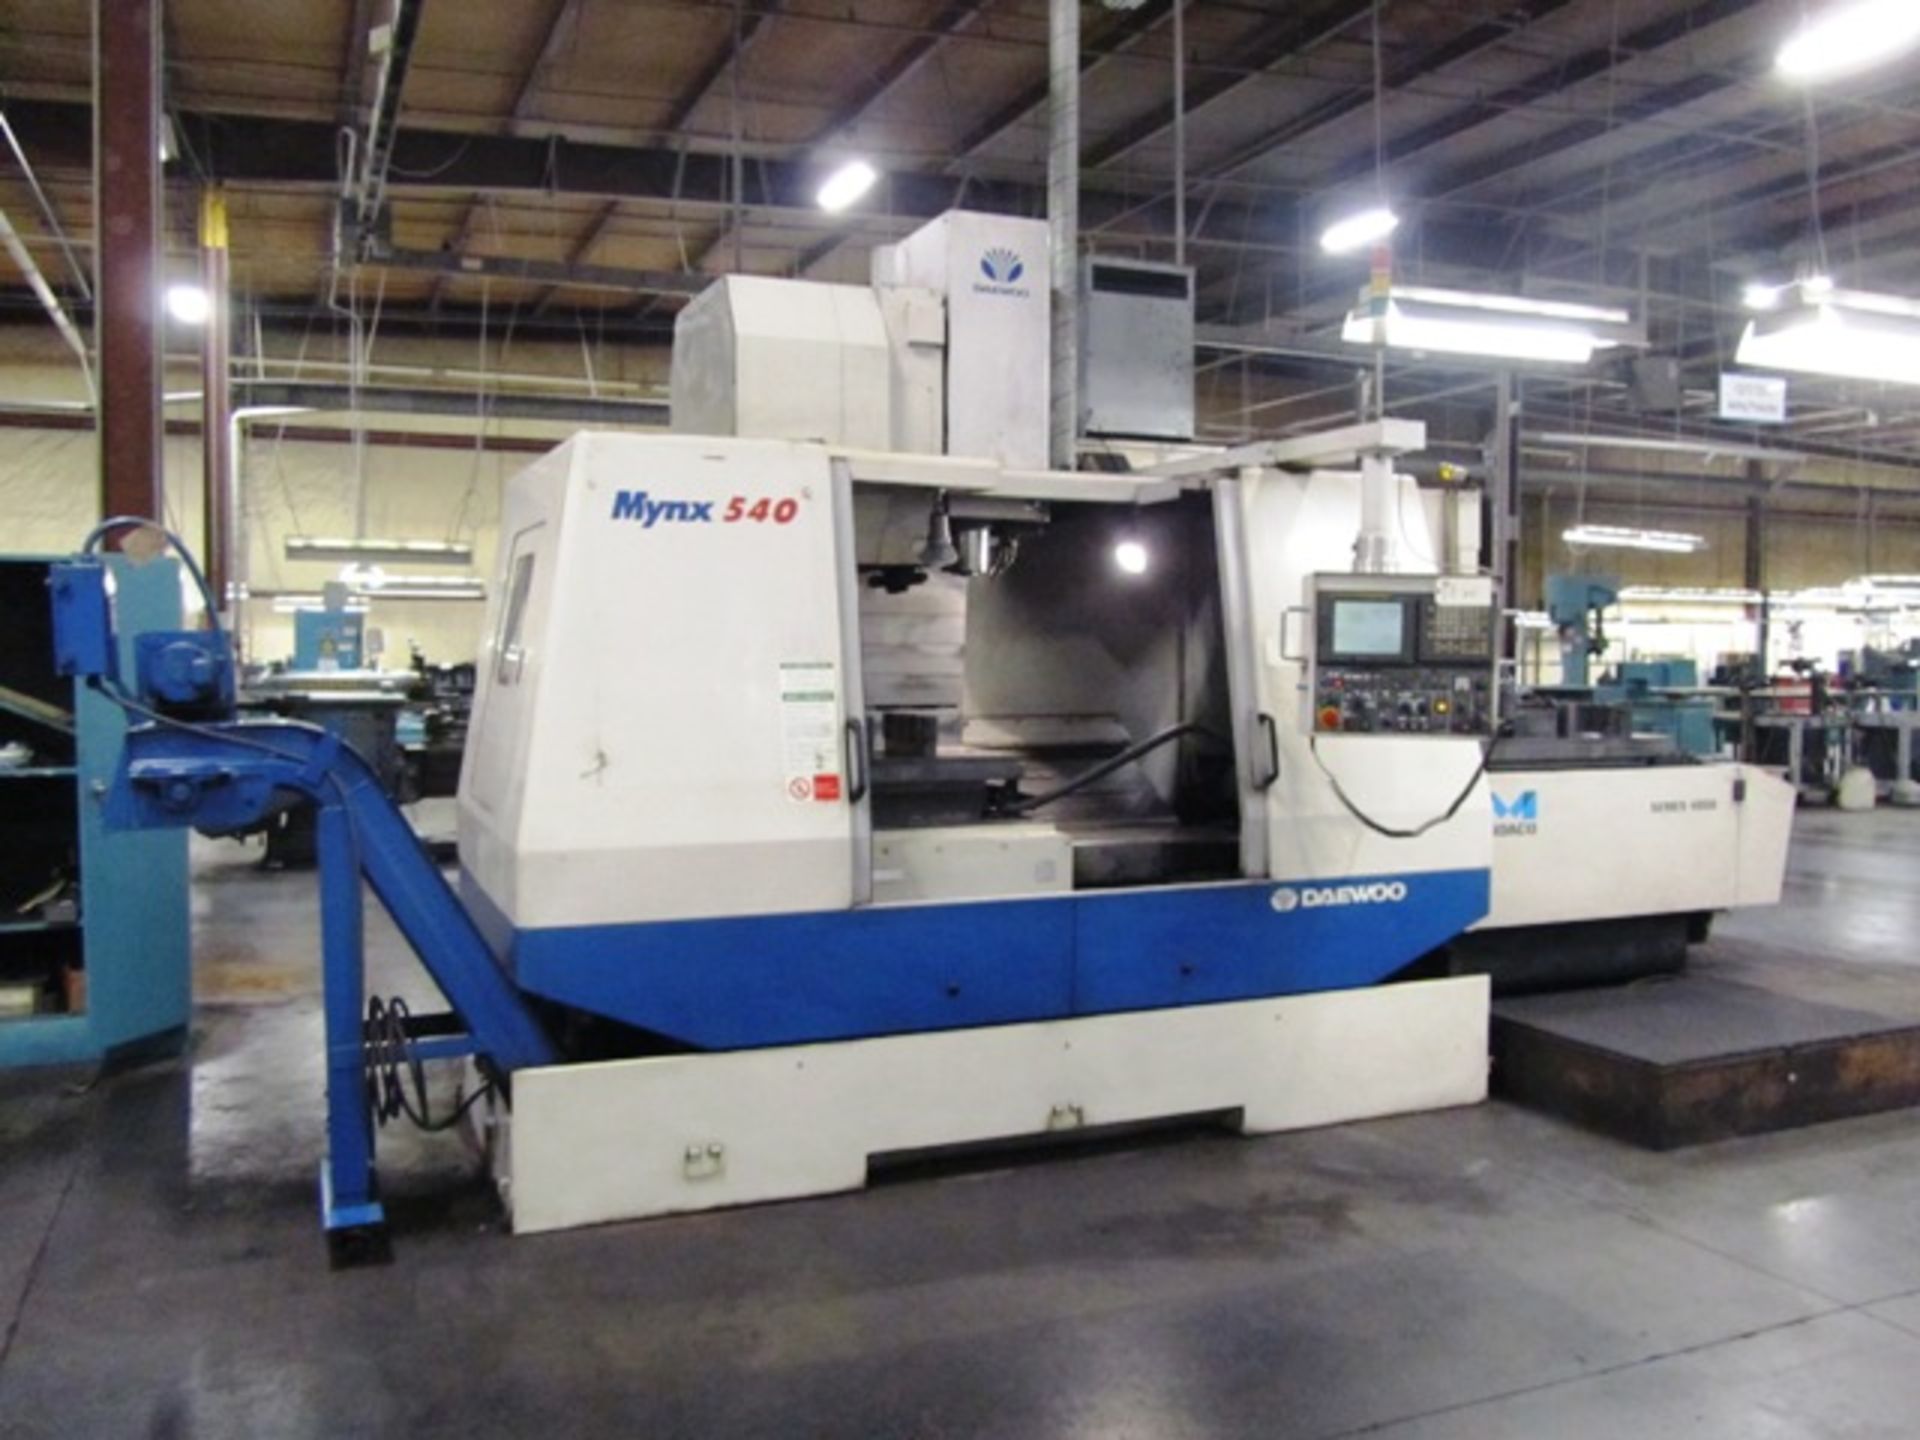 Daewoo MYNX540 Pallet Type CNC Vertical Machining Center with (2) Approx 47'' x 20'' Pallets, #40 - Image 3 of 5